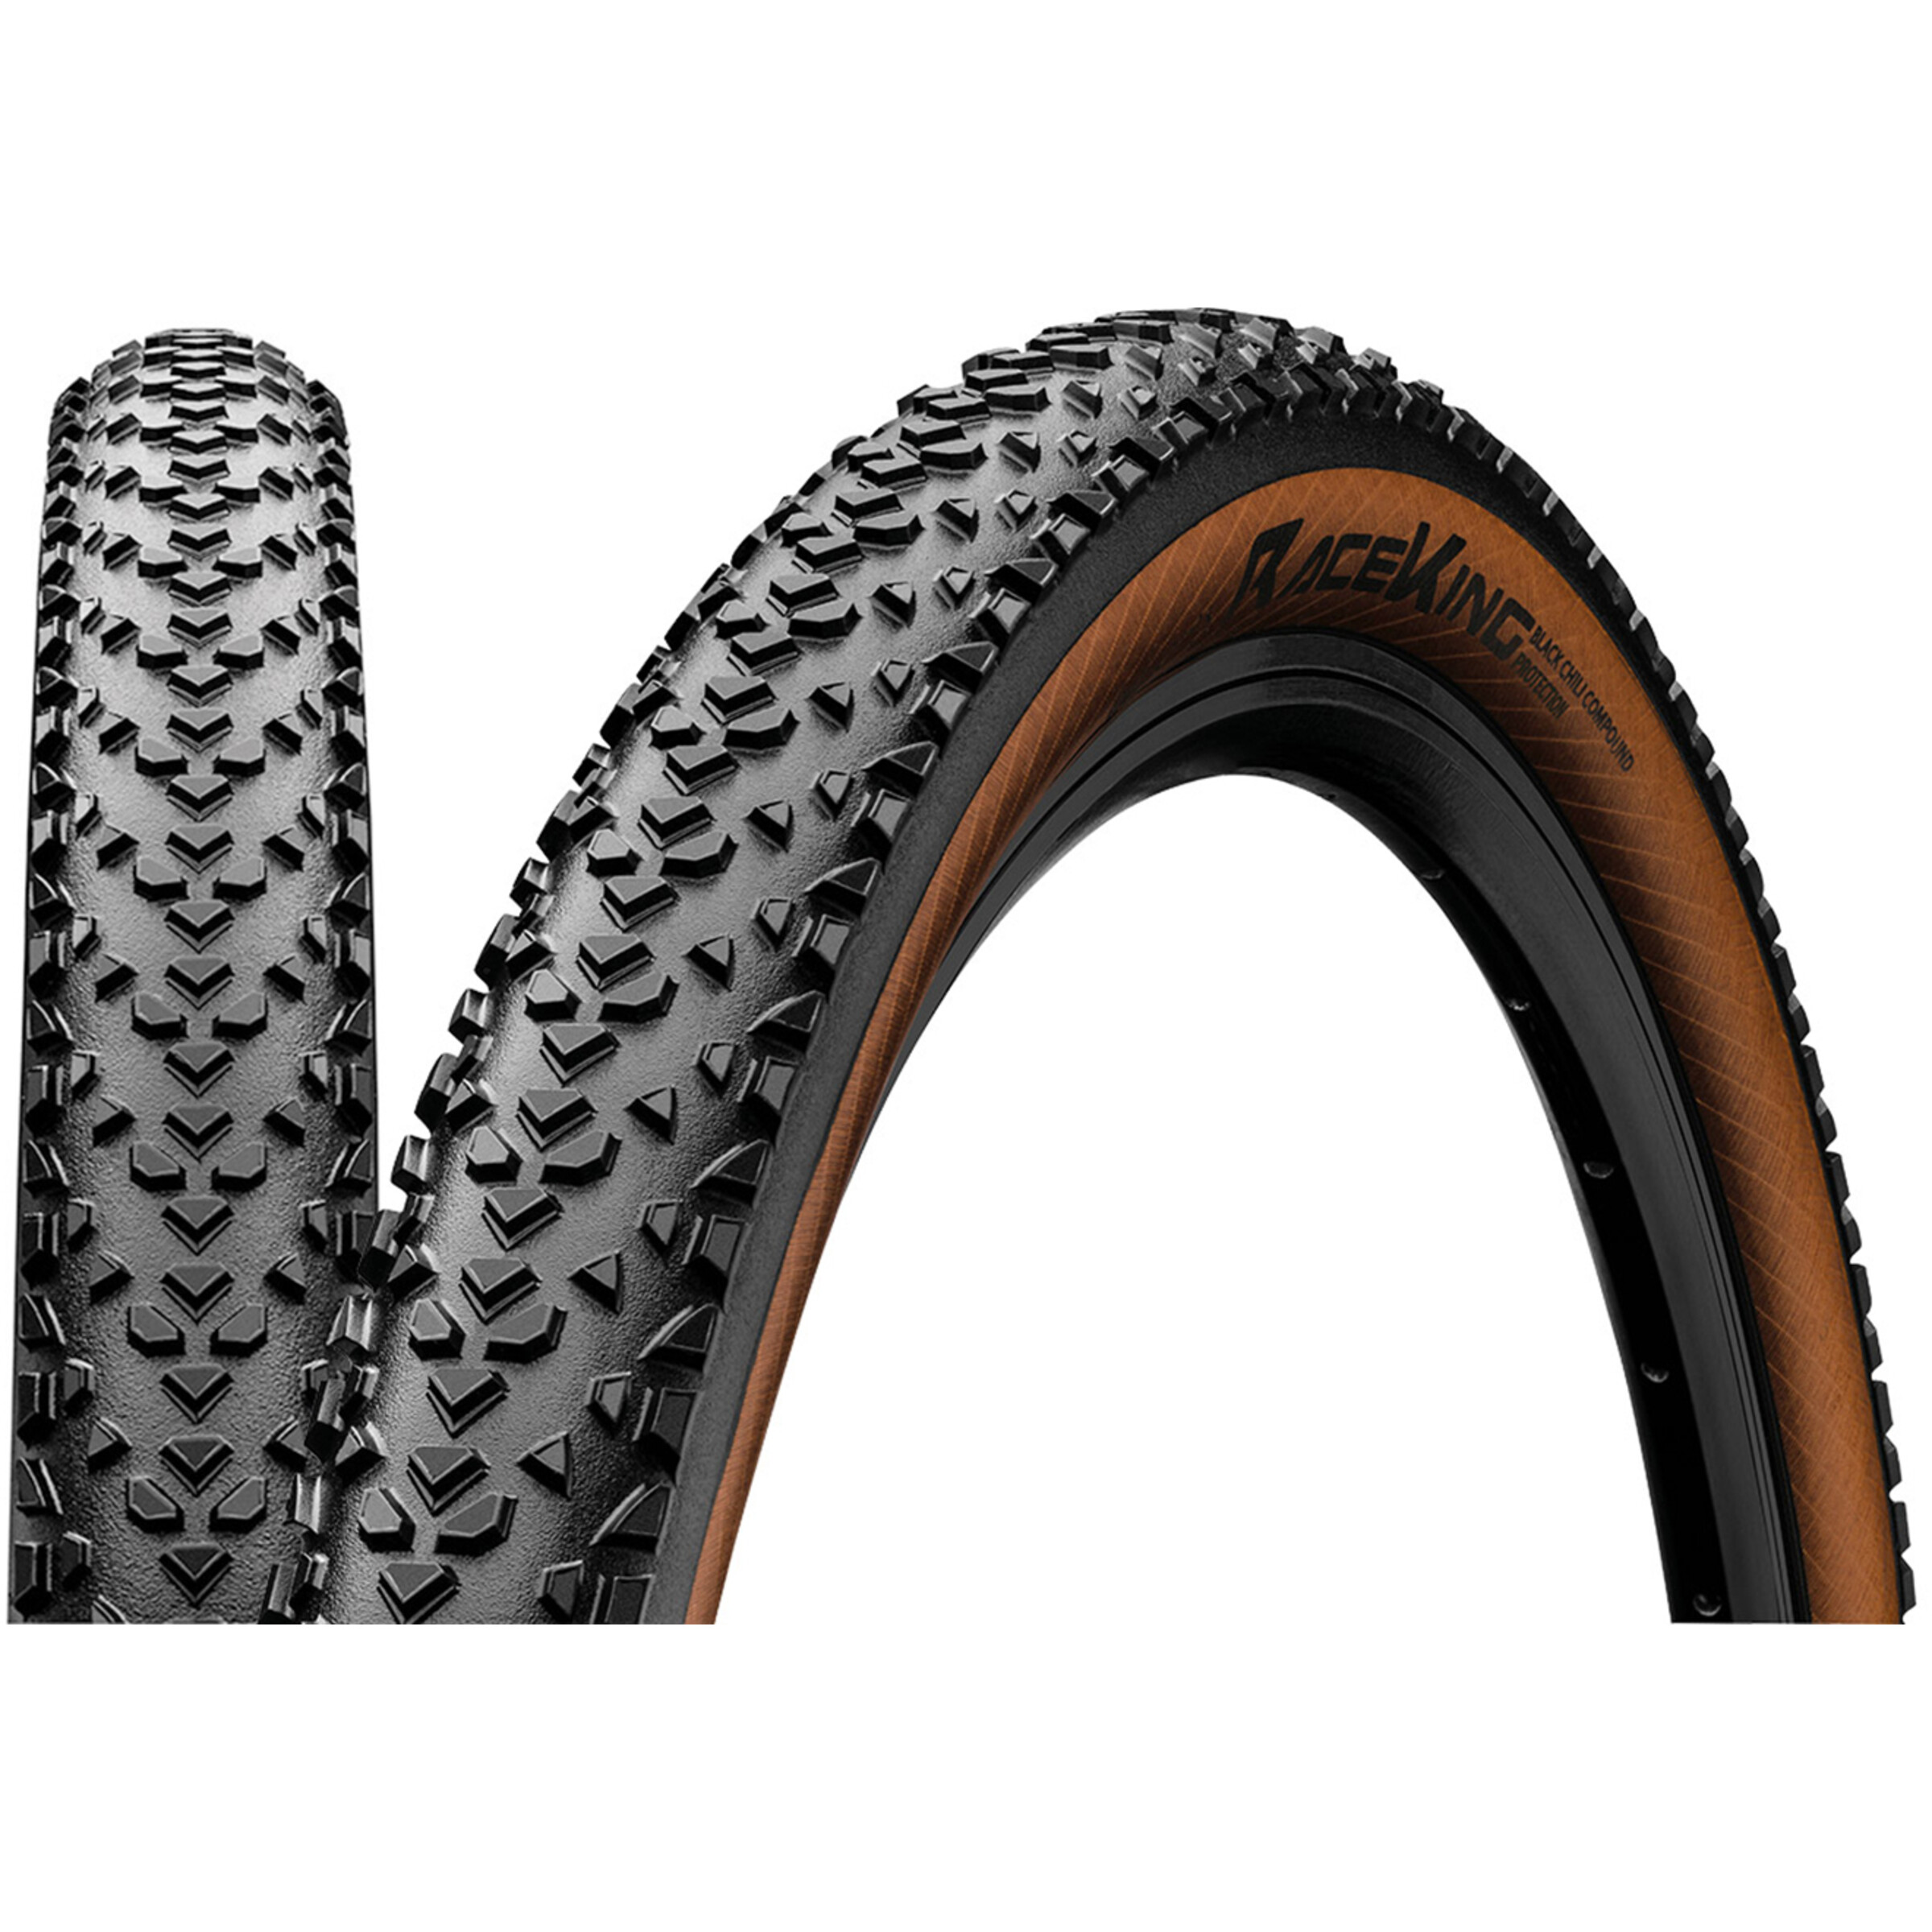 continental-race-king-folding-tyre-275x220-protection-tubeless-3